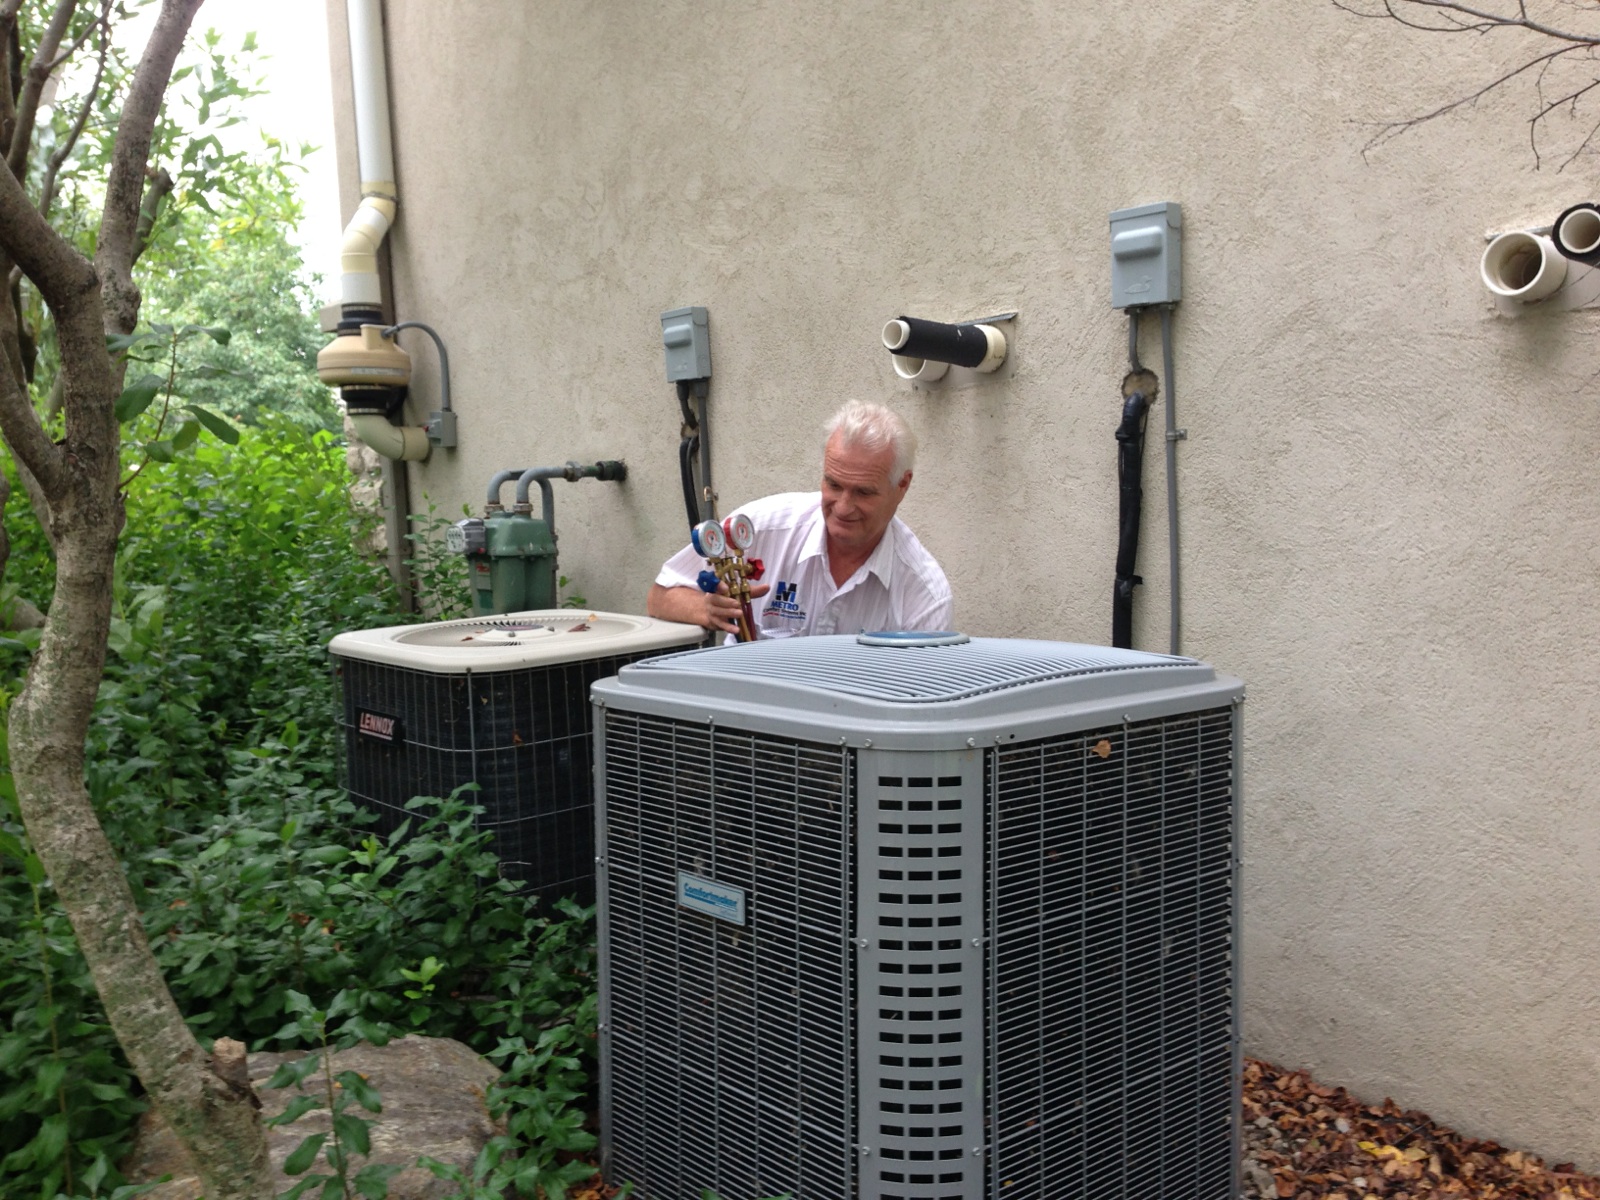 We're Friendly, Professional & Knowledgeable Metro Comfort Systems Heating and Air Conditioning Powell (614)760-5883